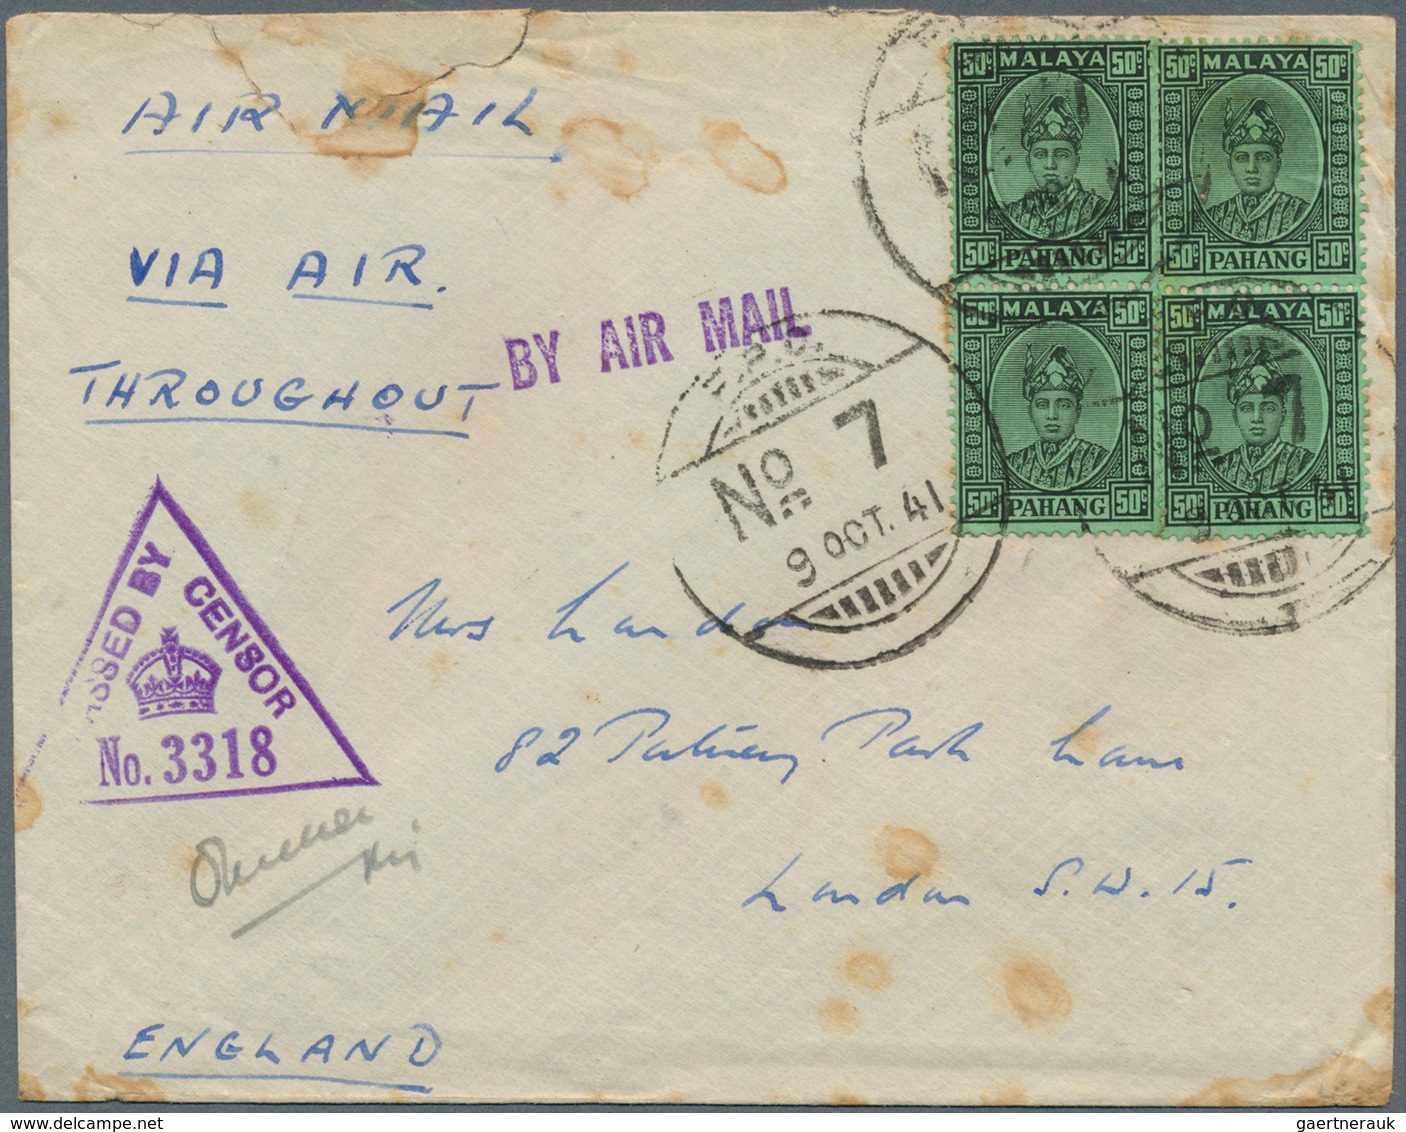 06280 Malaiische Staaten - Pahang: 1941 (9.10.), Airmail Cover Endorsed 'via Air Throughout' Bearing Sulta - Pahang